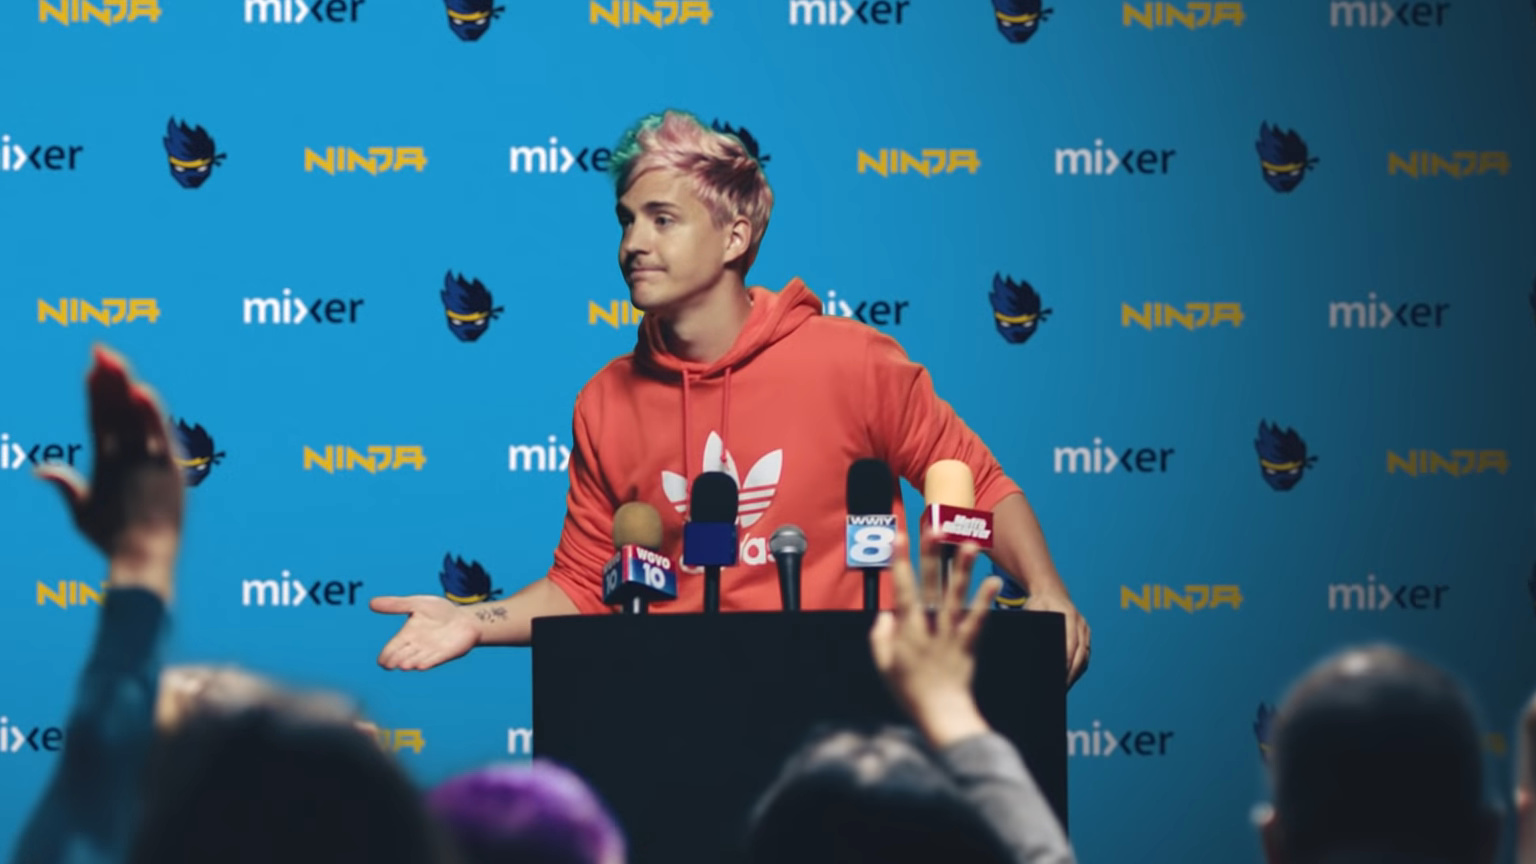 Ninja says Faze Jarvis shouldn't be permabanned from Fortnite